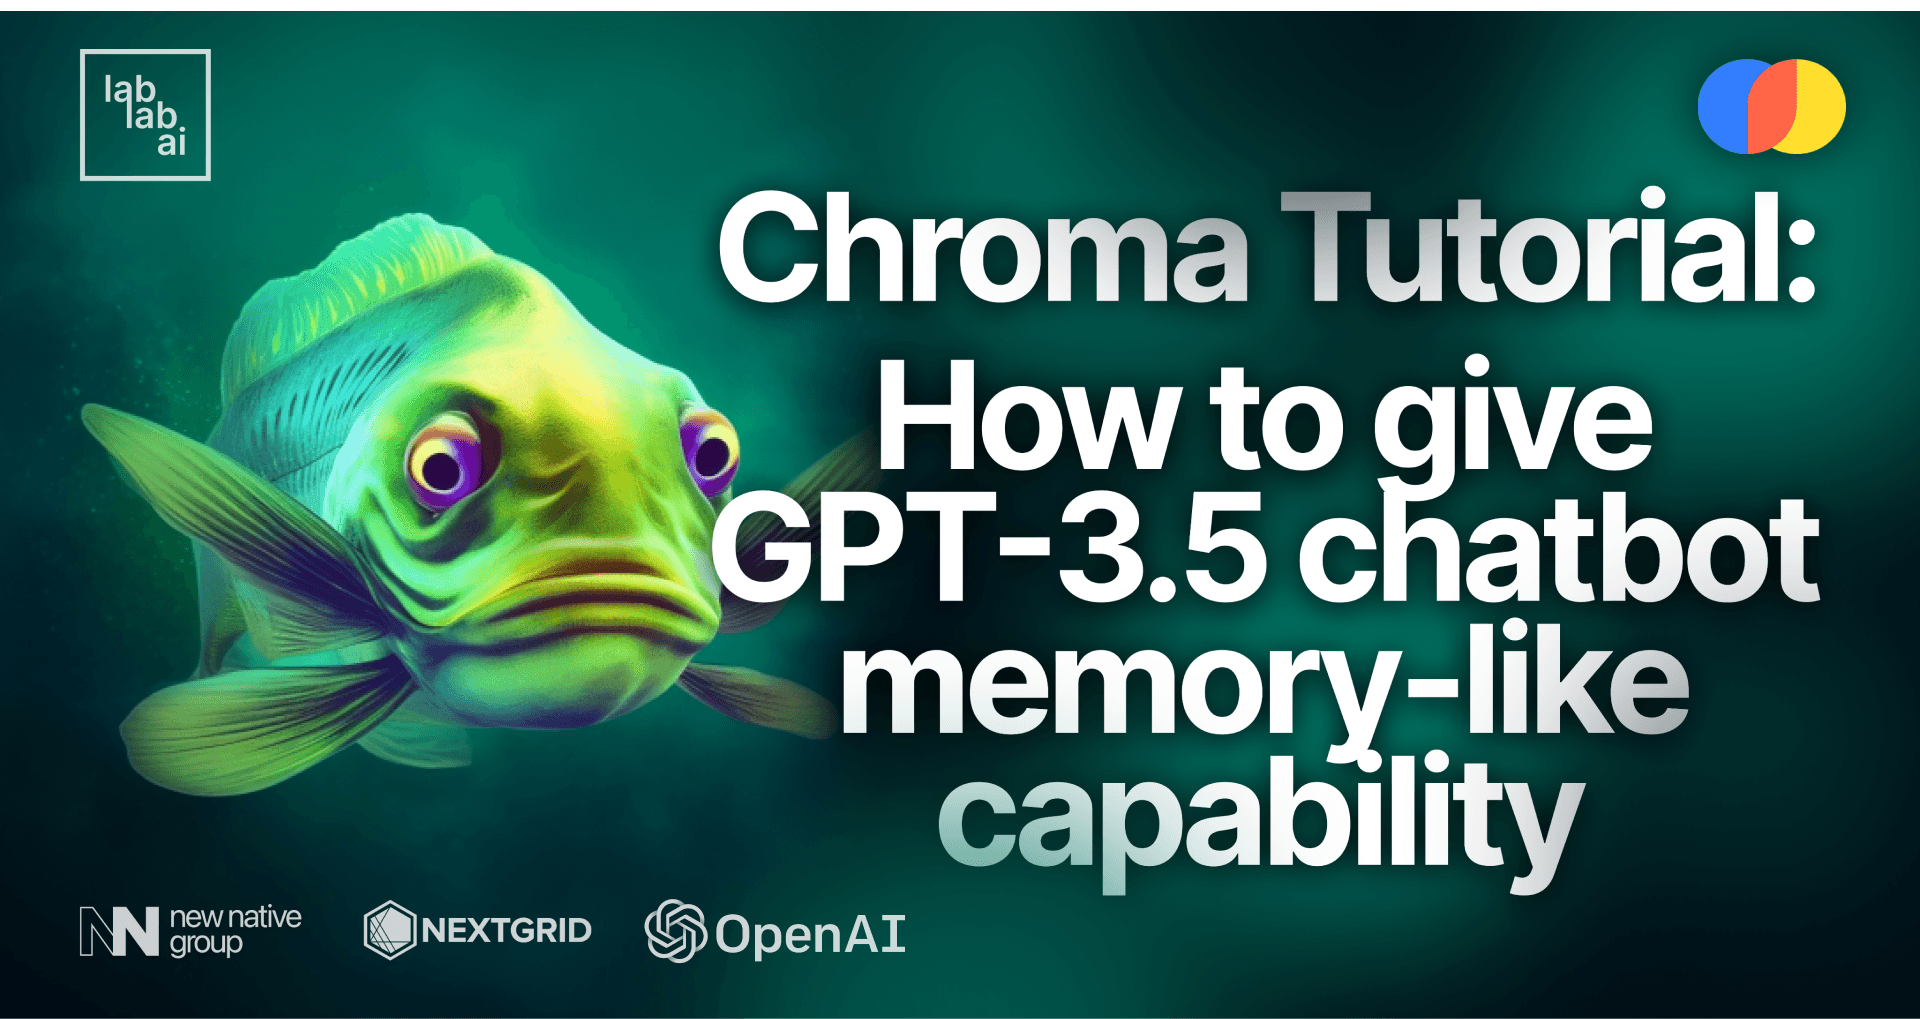 Chroma Tutorial: How to give GPT-3.5 chatbot memory-like capability